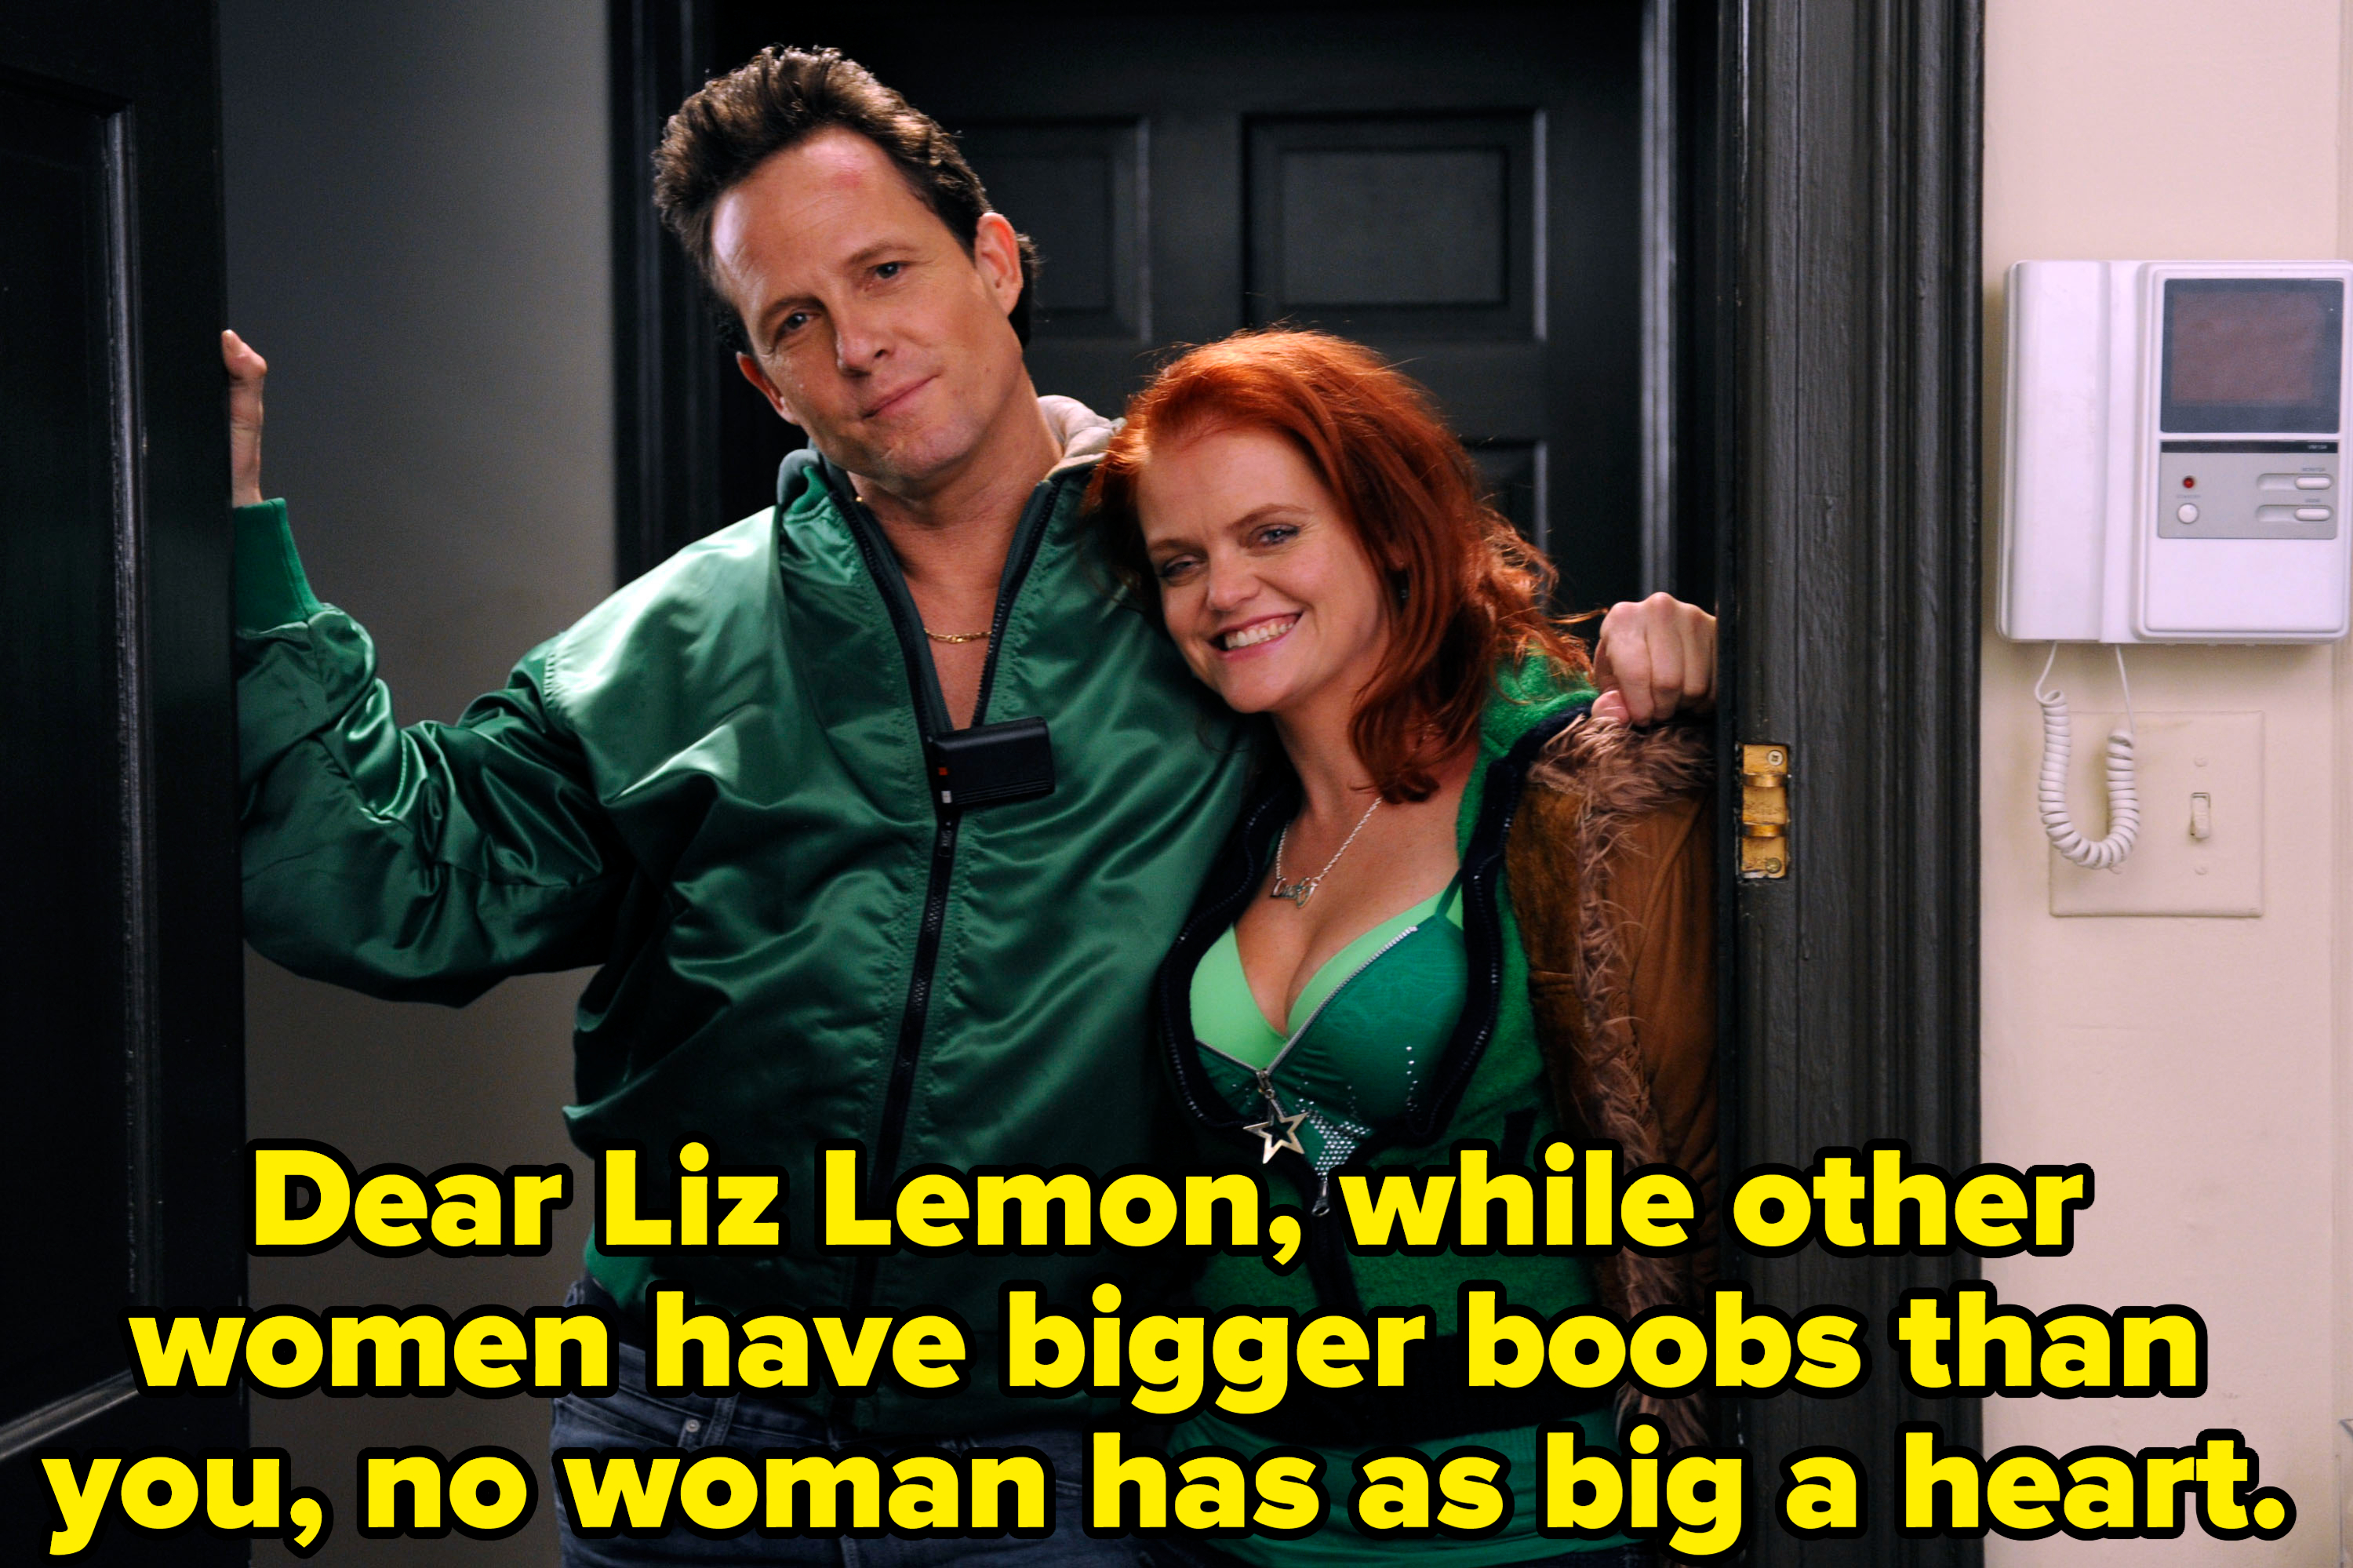 Dean Winters and Megan stand together